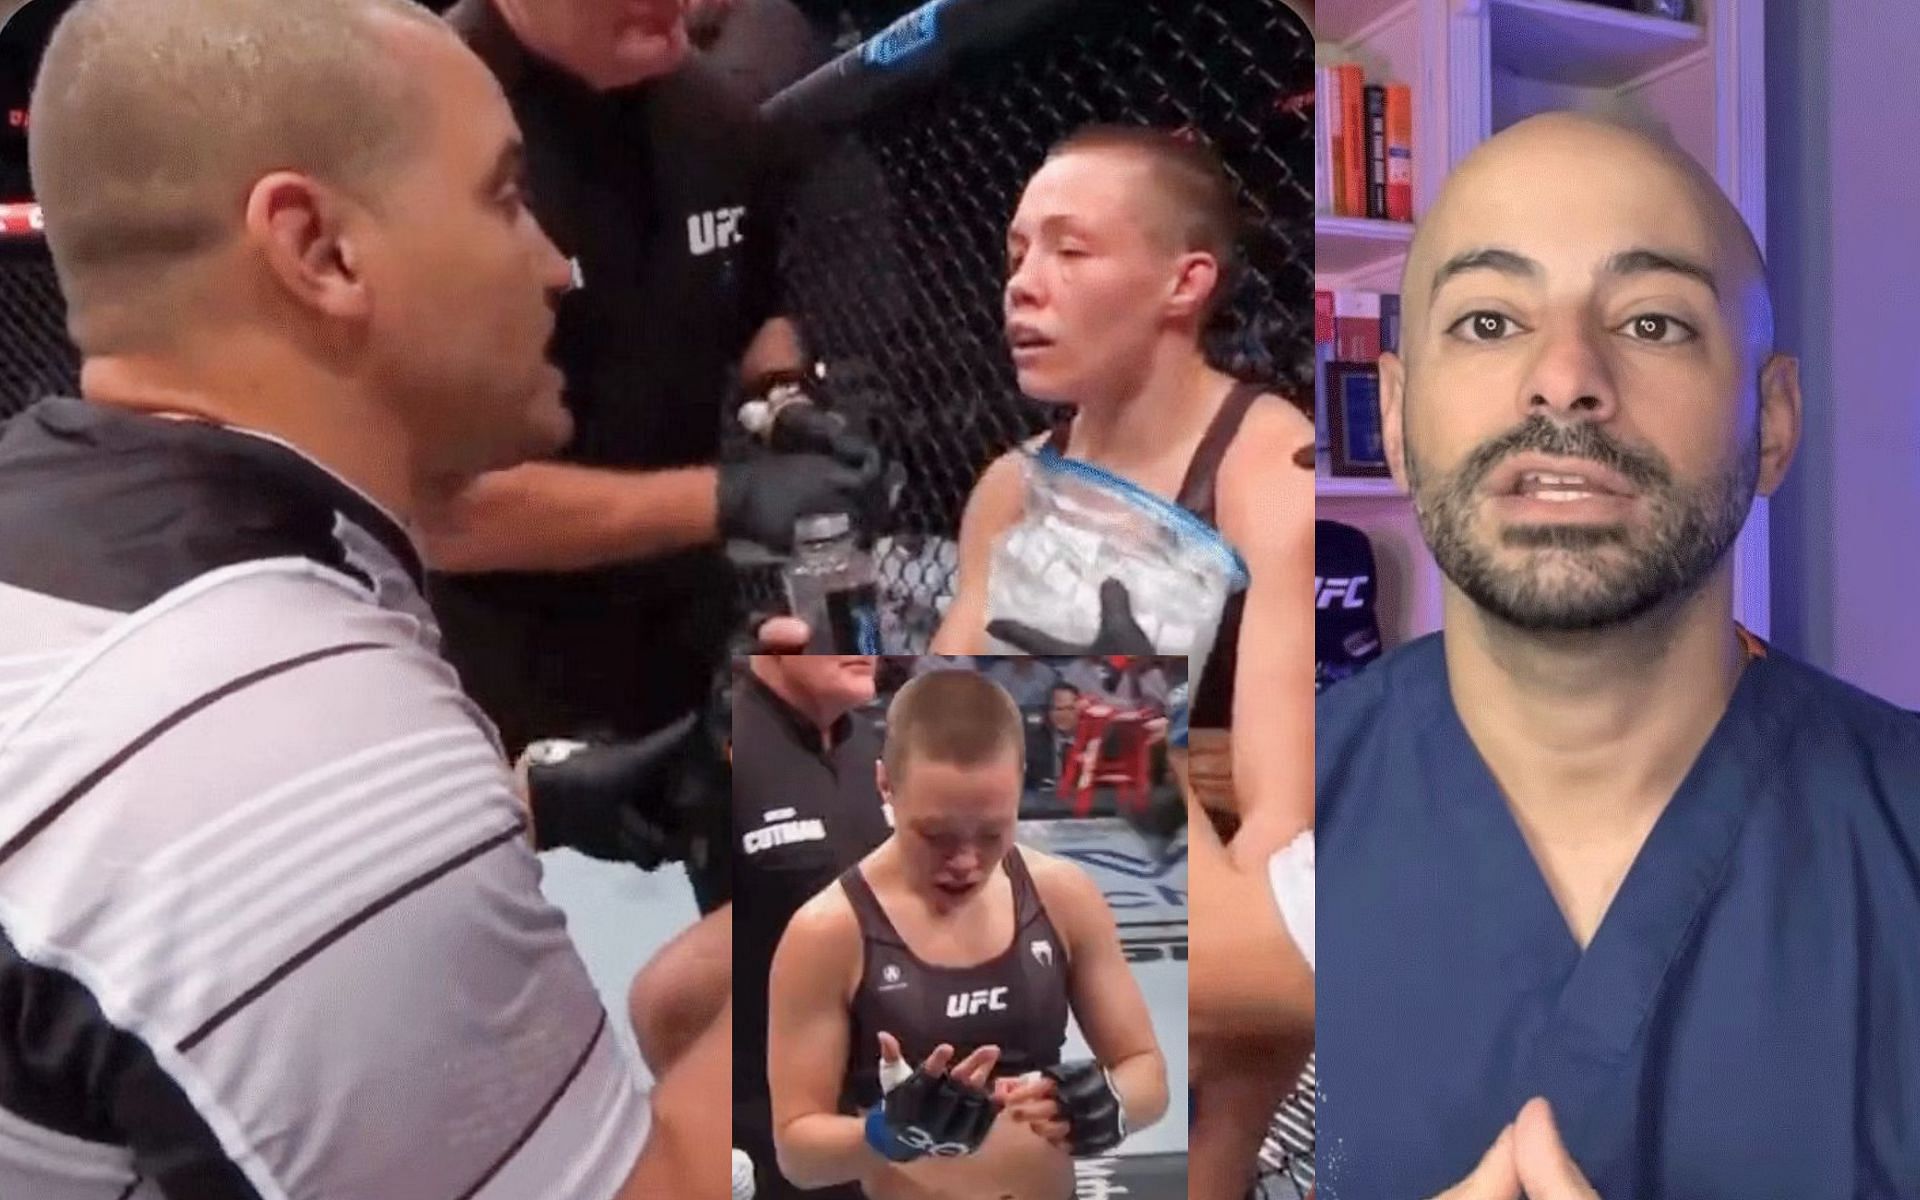 Pat Barry and Rose Namajunas (left and inset) and Dr David Abbasi (right). [via Twitter @InsideFighting and YouTube David Abbasi, MD]